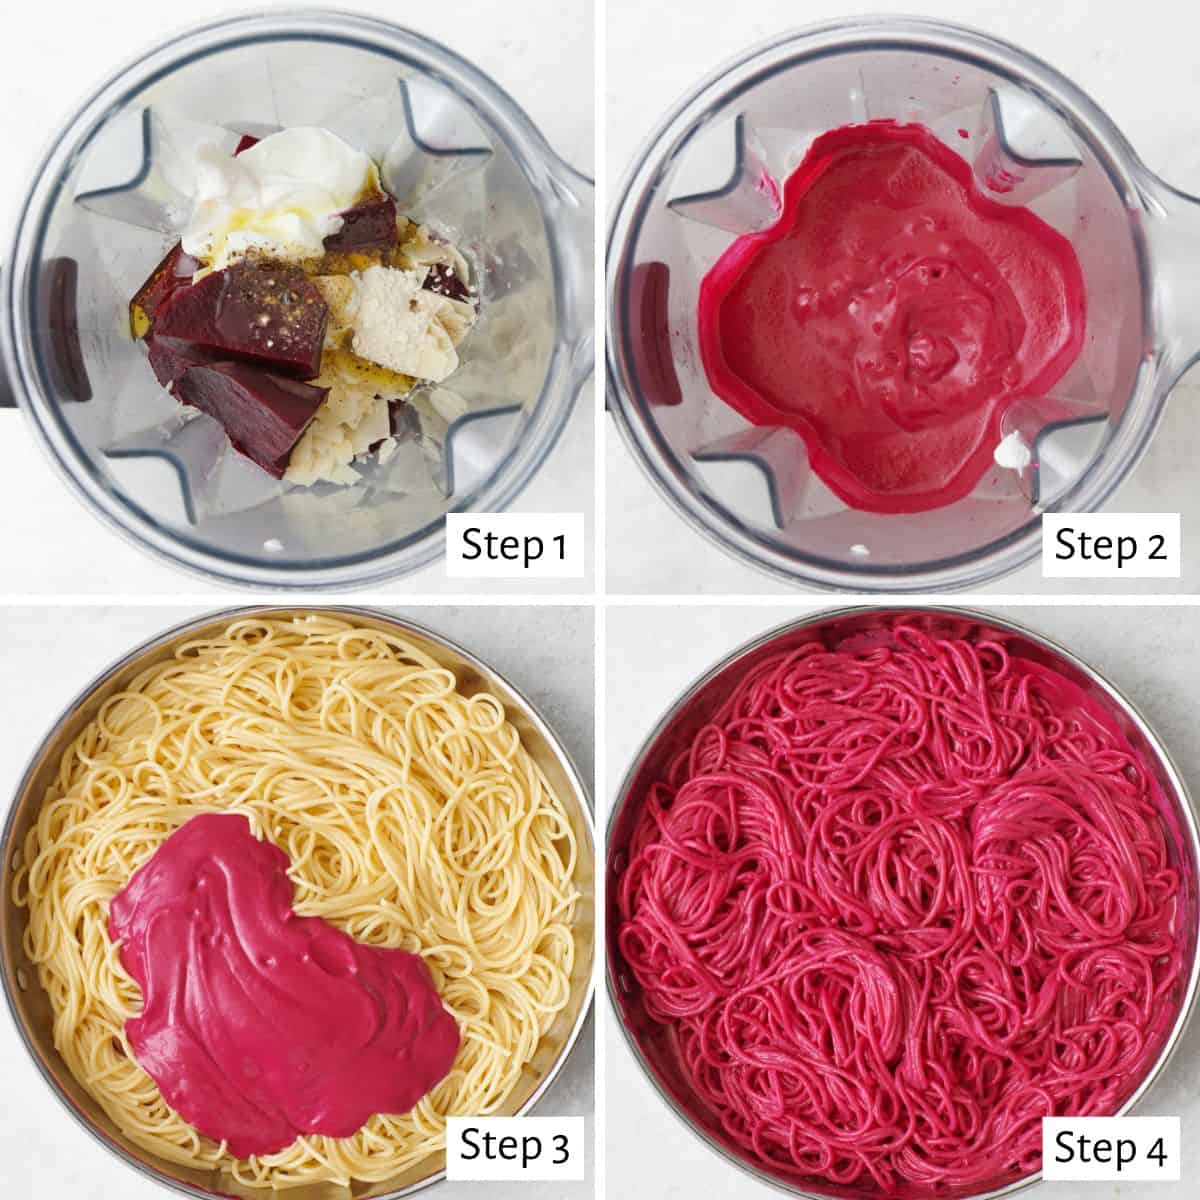 4 image collage making recipe: 1- sauce ingredients in a blender before blending, 2- after blending, 3- cooked pasta in a pan with sauce added, and 4- after pasta and sauce are combined.